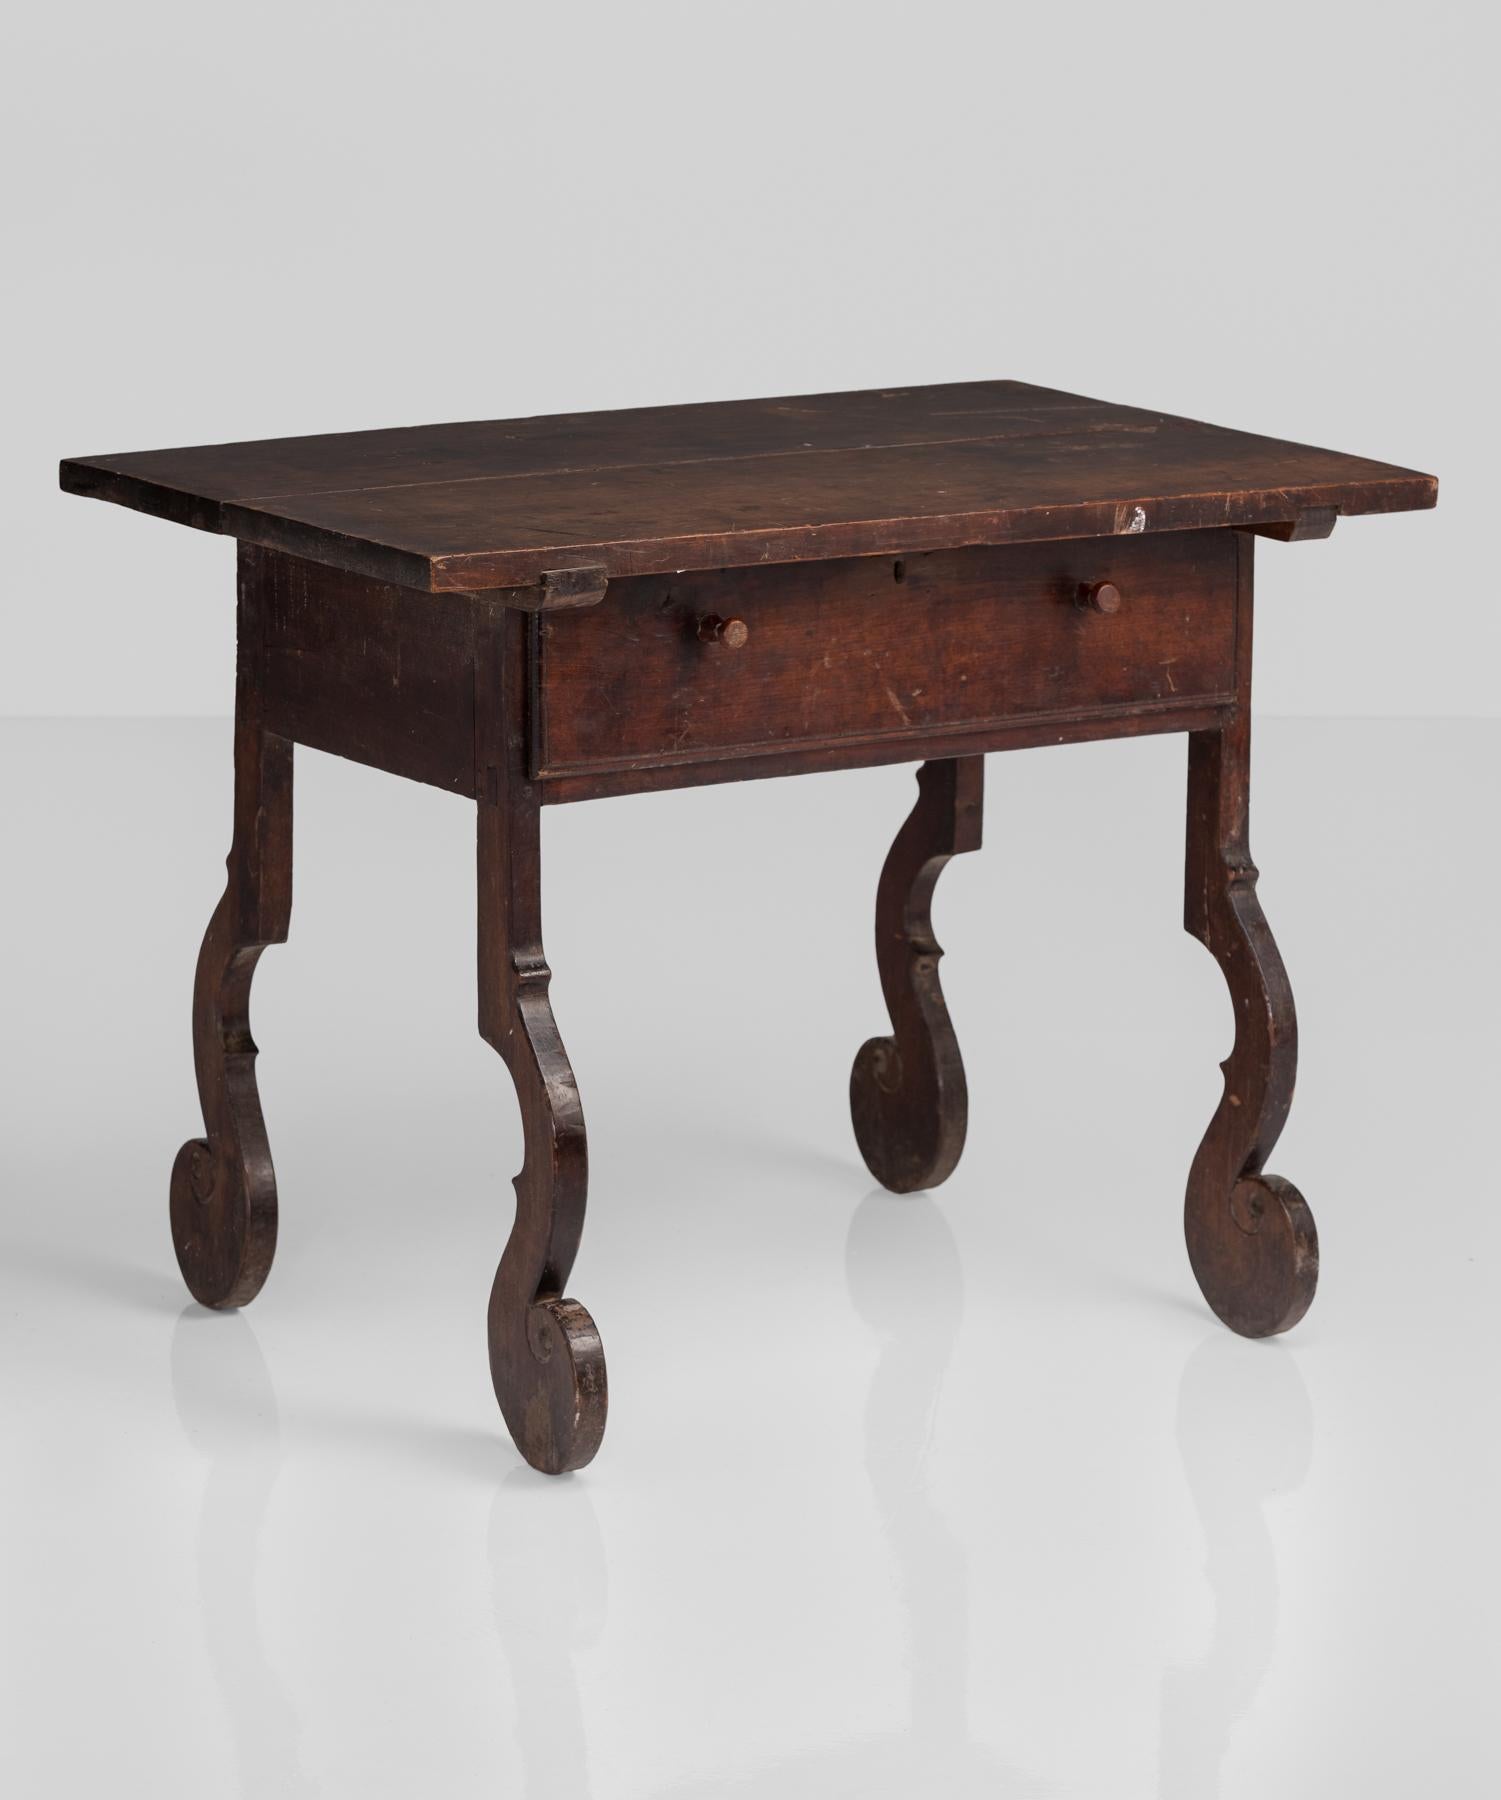 Unusual tall walnut side table or desk, Italy, circa 1790.

Elegant form with unique detailing includes wonderfully playful legs with feet that curl upwards.